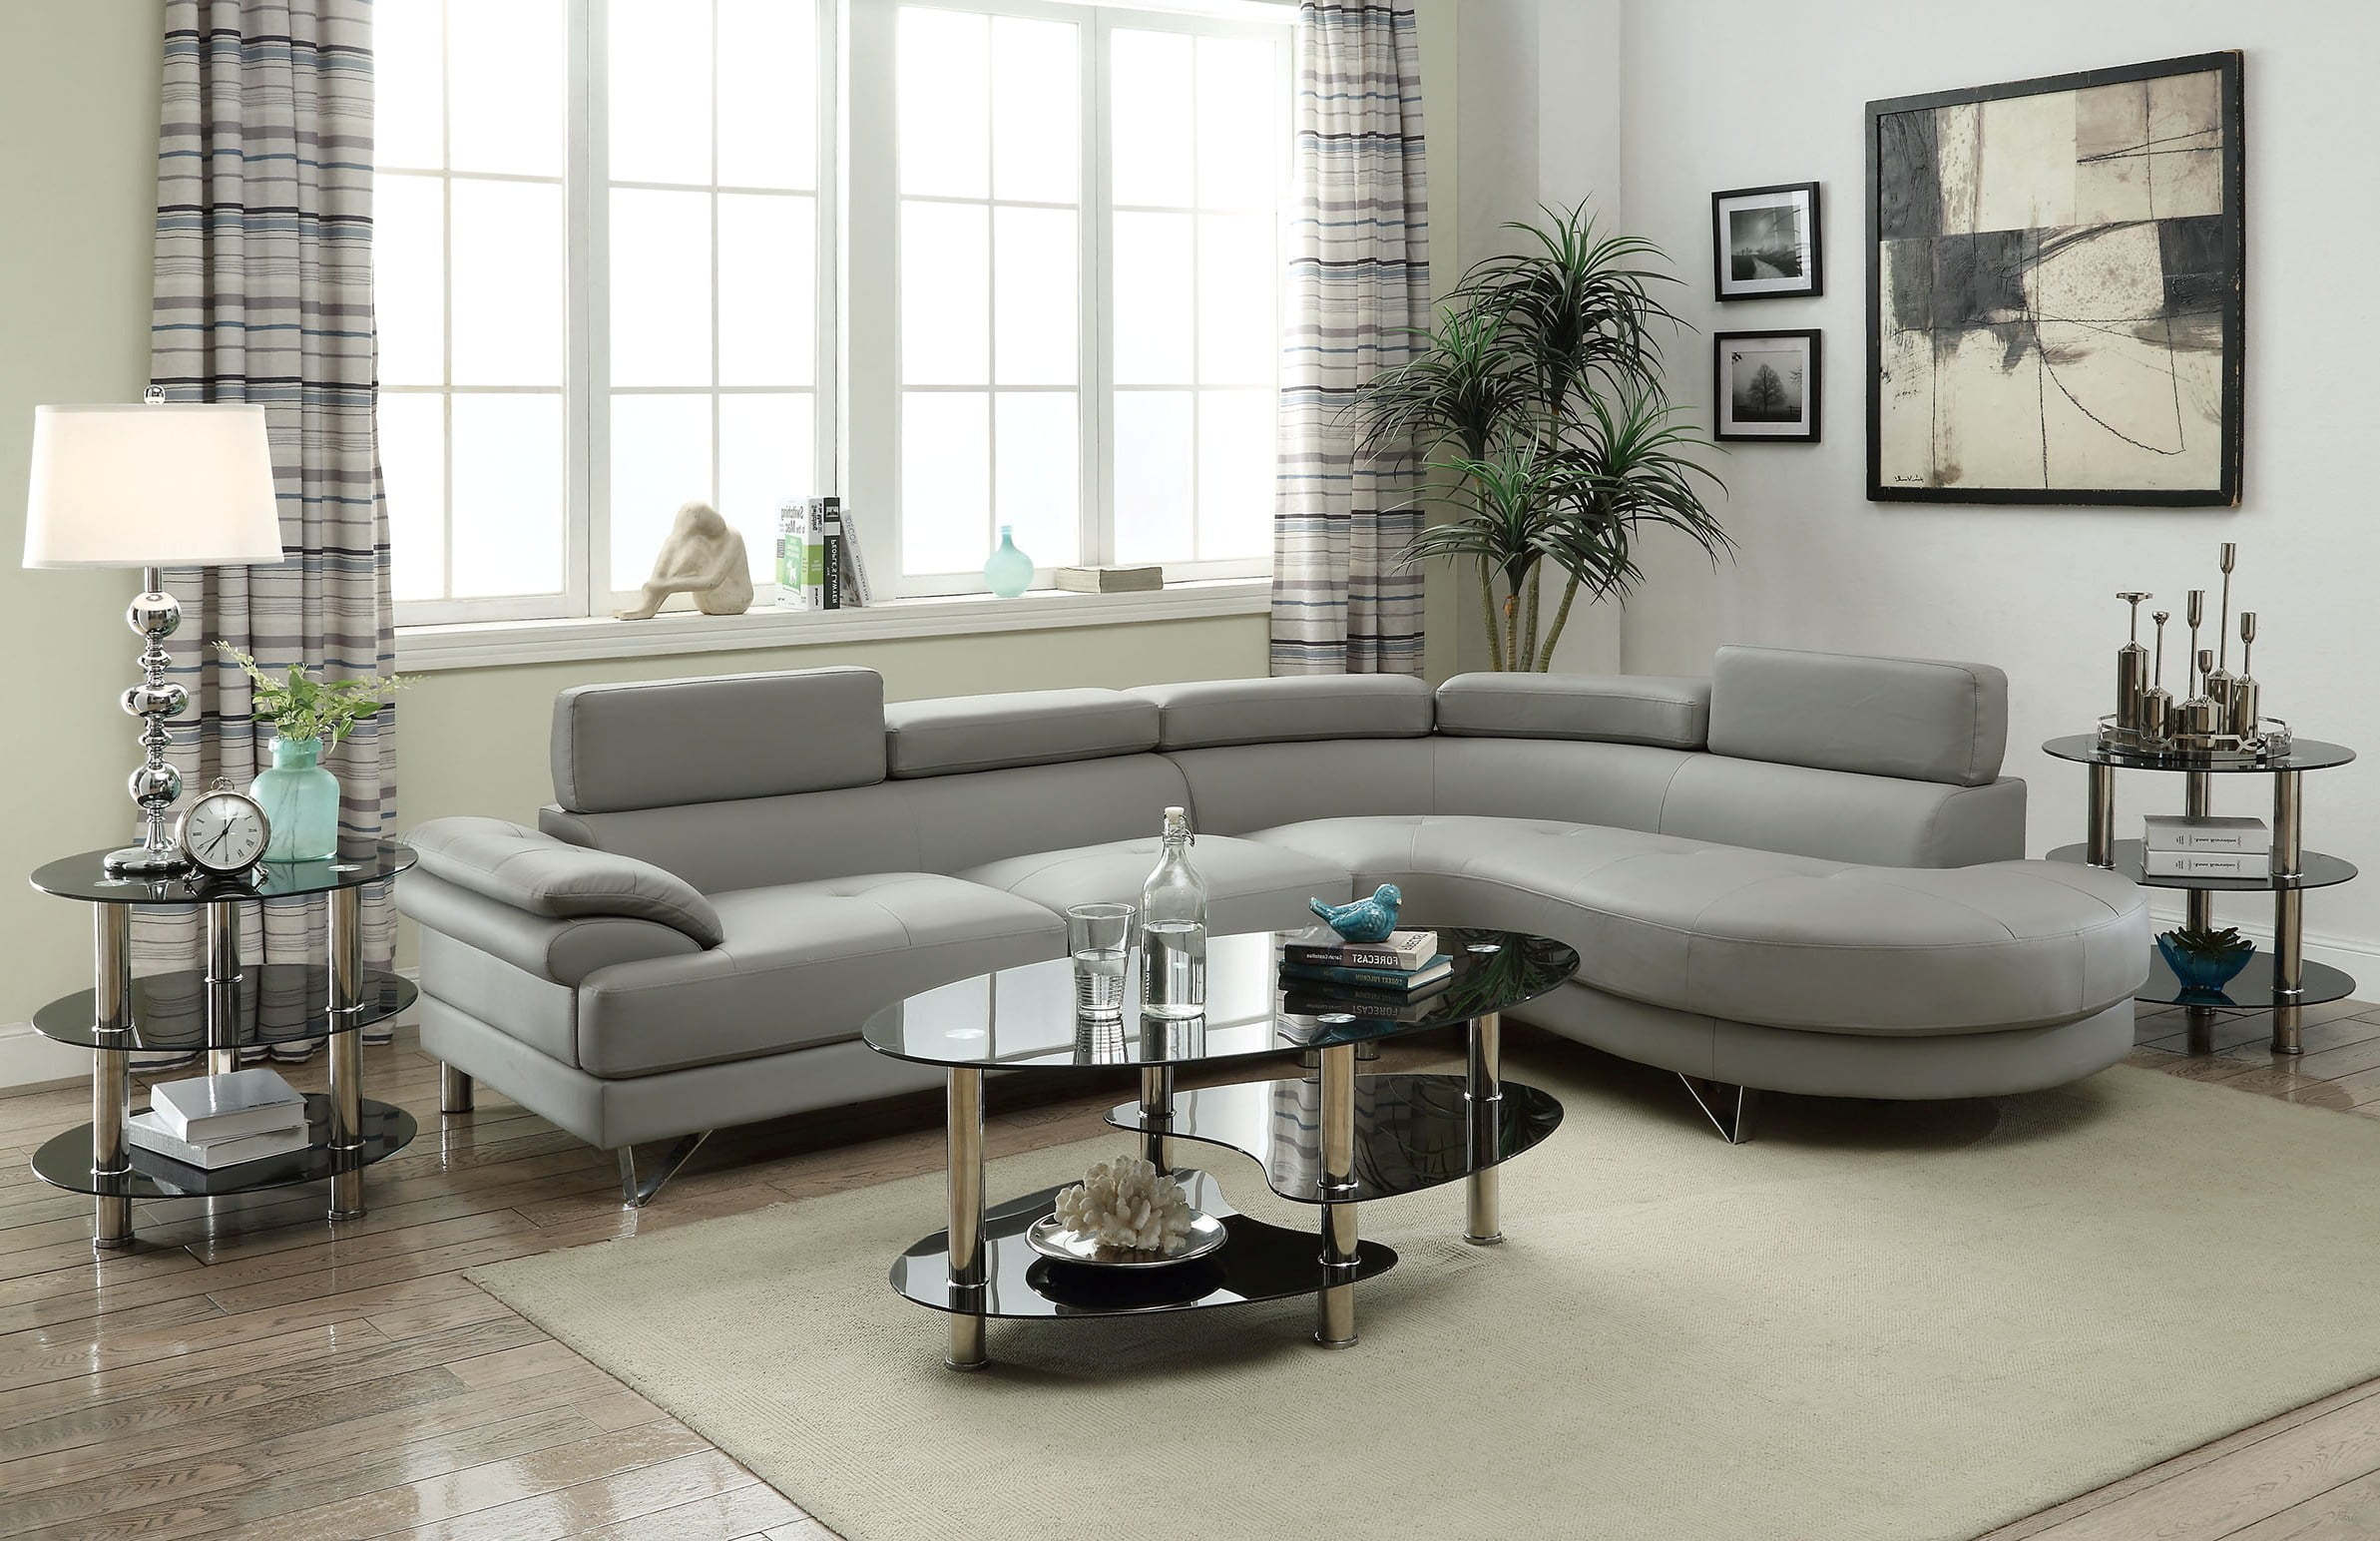 light gray leather sofa with chaise